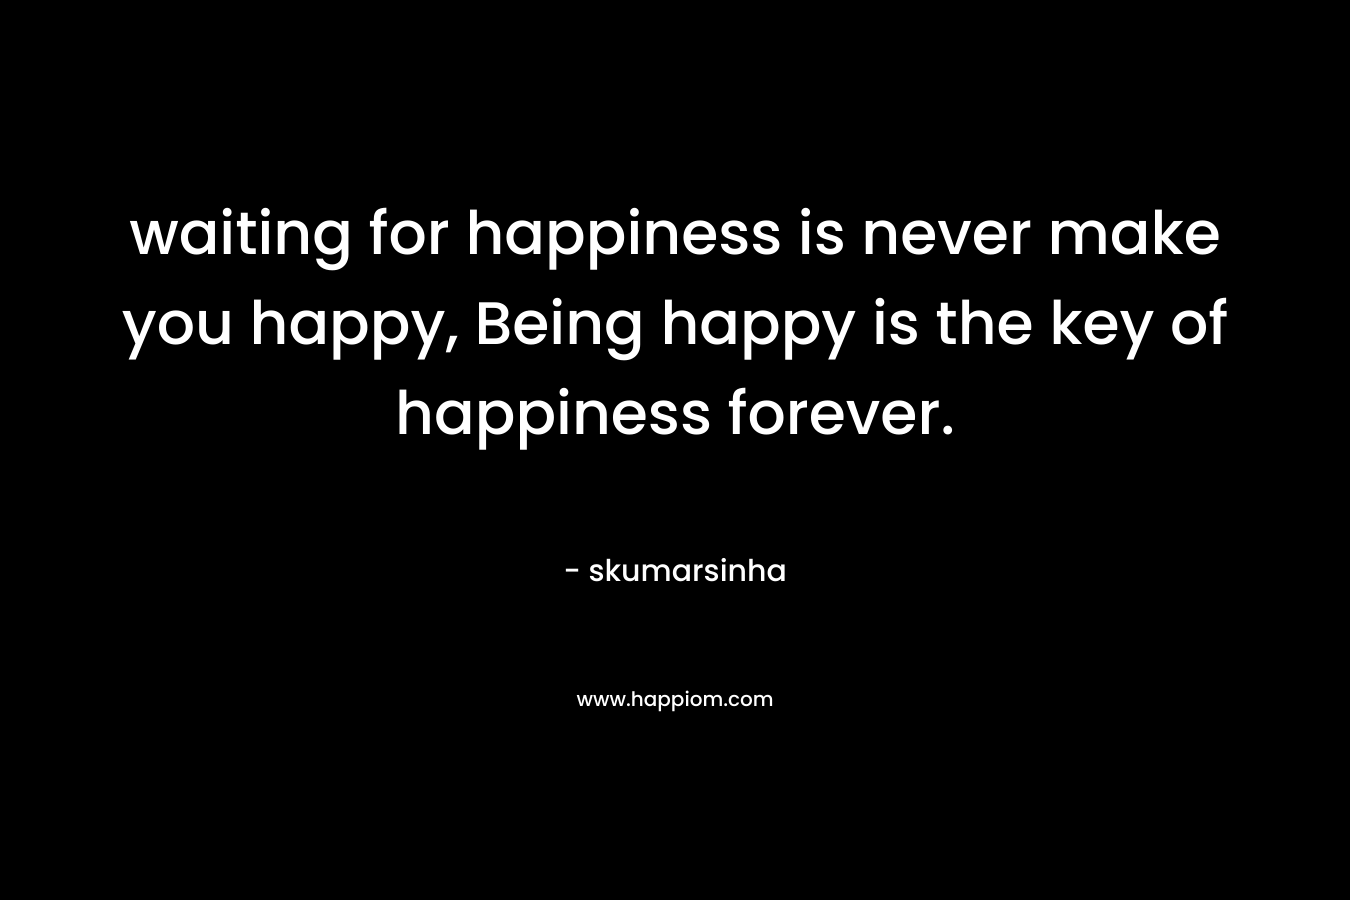 waiting for happiness is never make you happy, Being happy is the key of happiness forever.